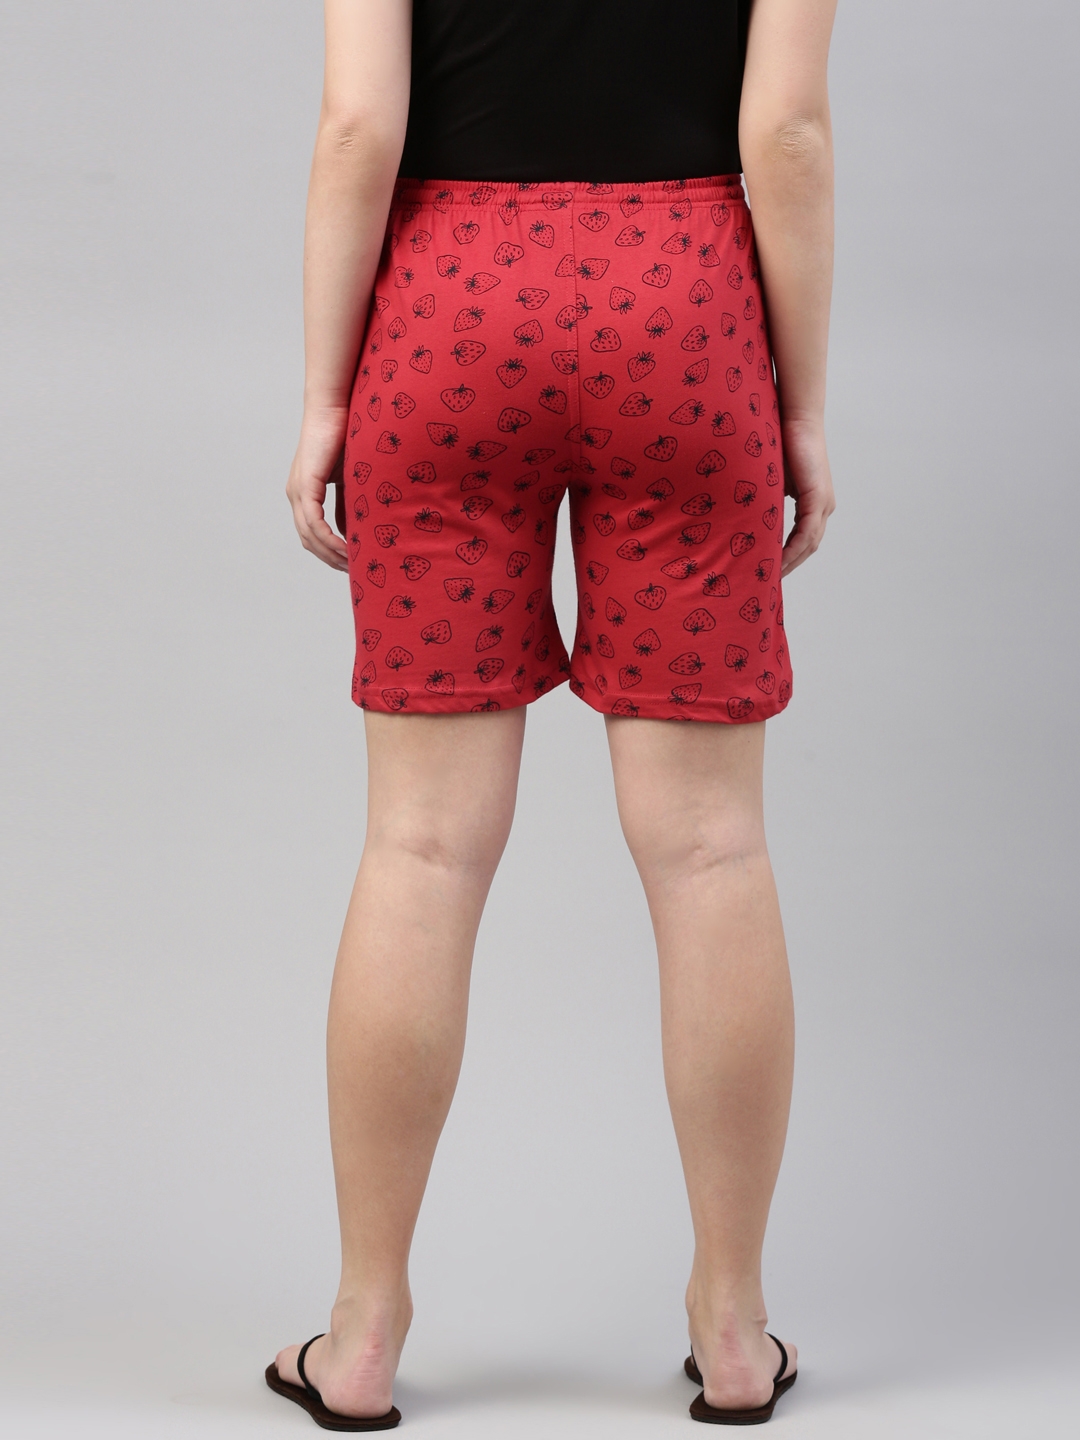 Kryptic | Kryptic Women's 100% Cotton Printed Shorts - Pack of 2 3